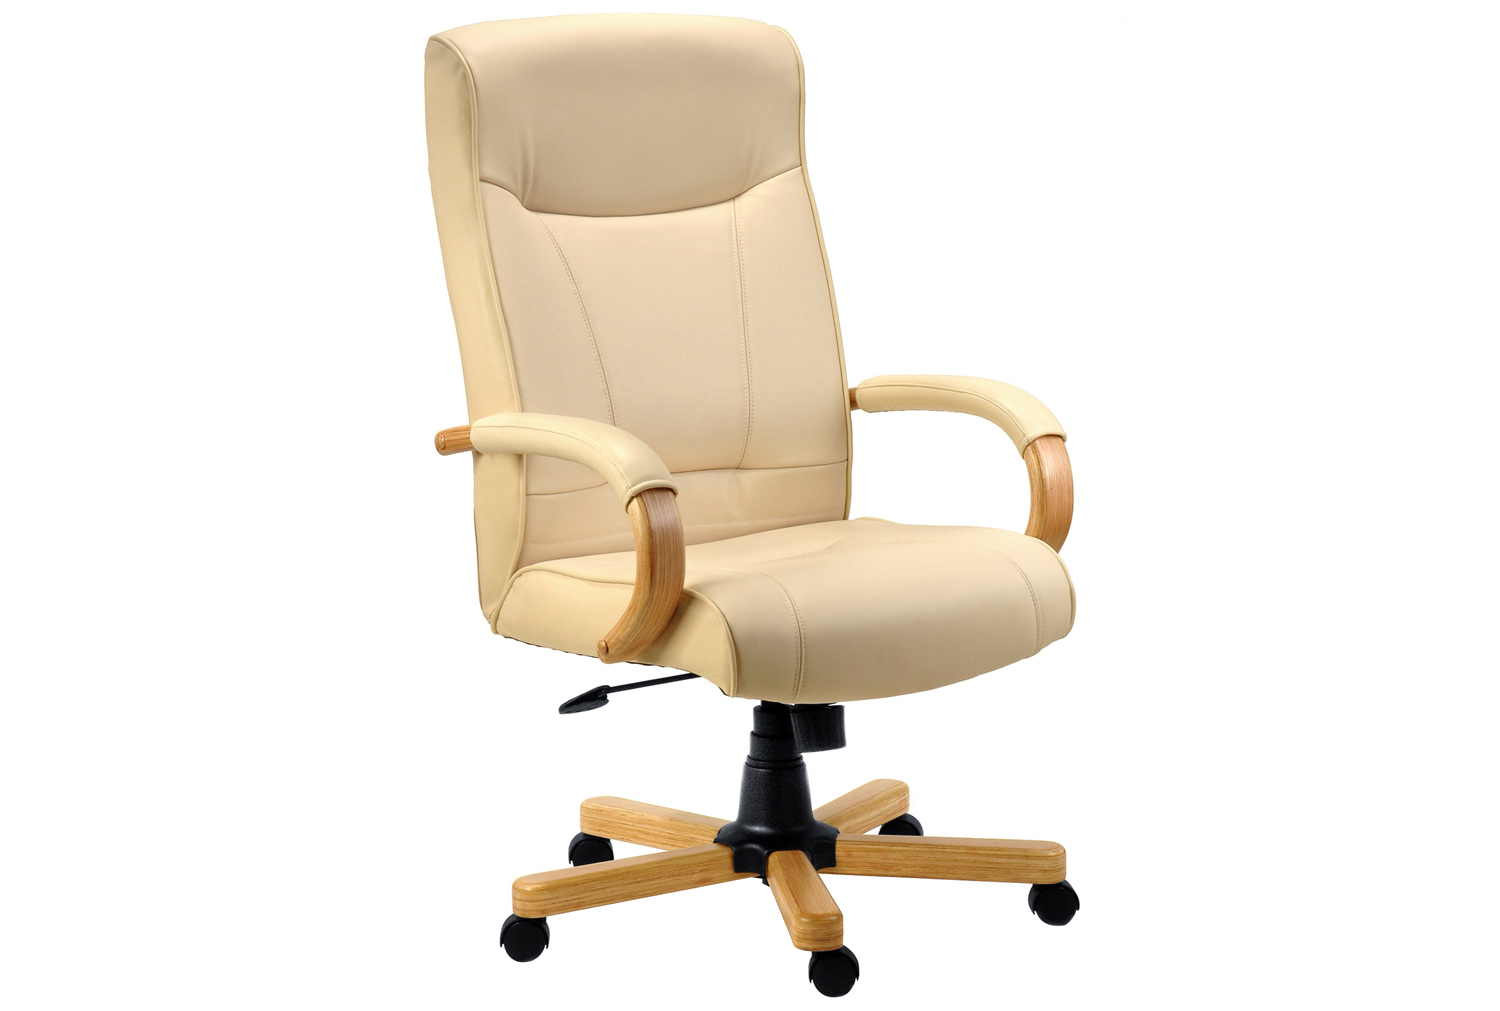 Knightsbridge Leather Faced Executive Office Chair Oak/Cream, Fully Installed